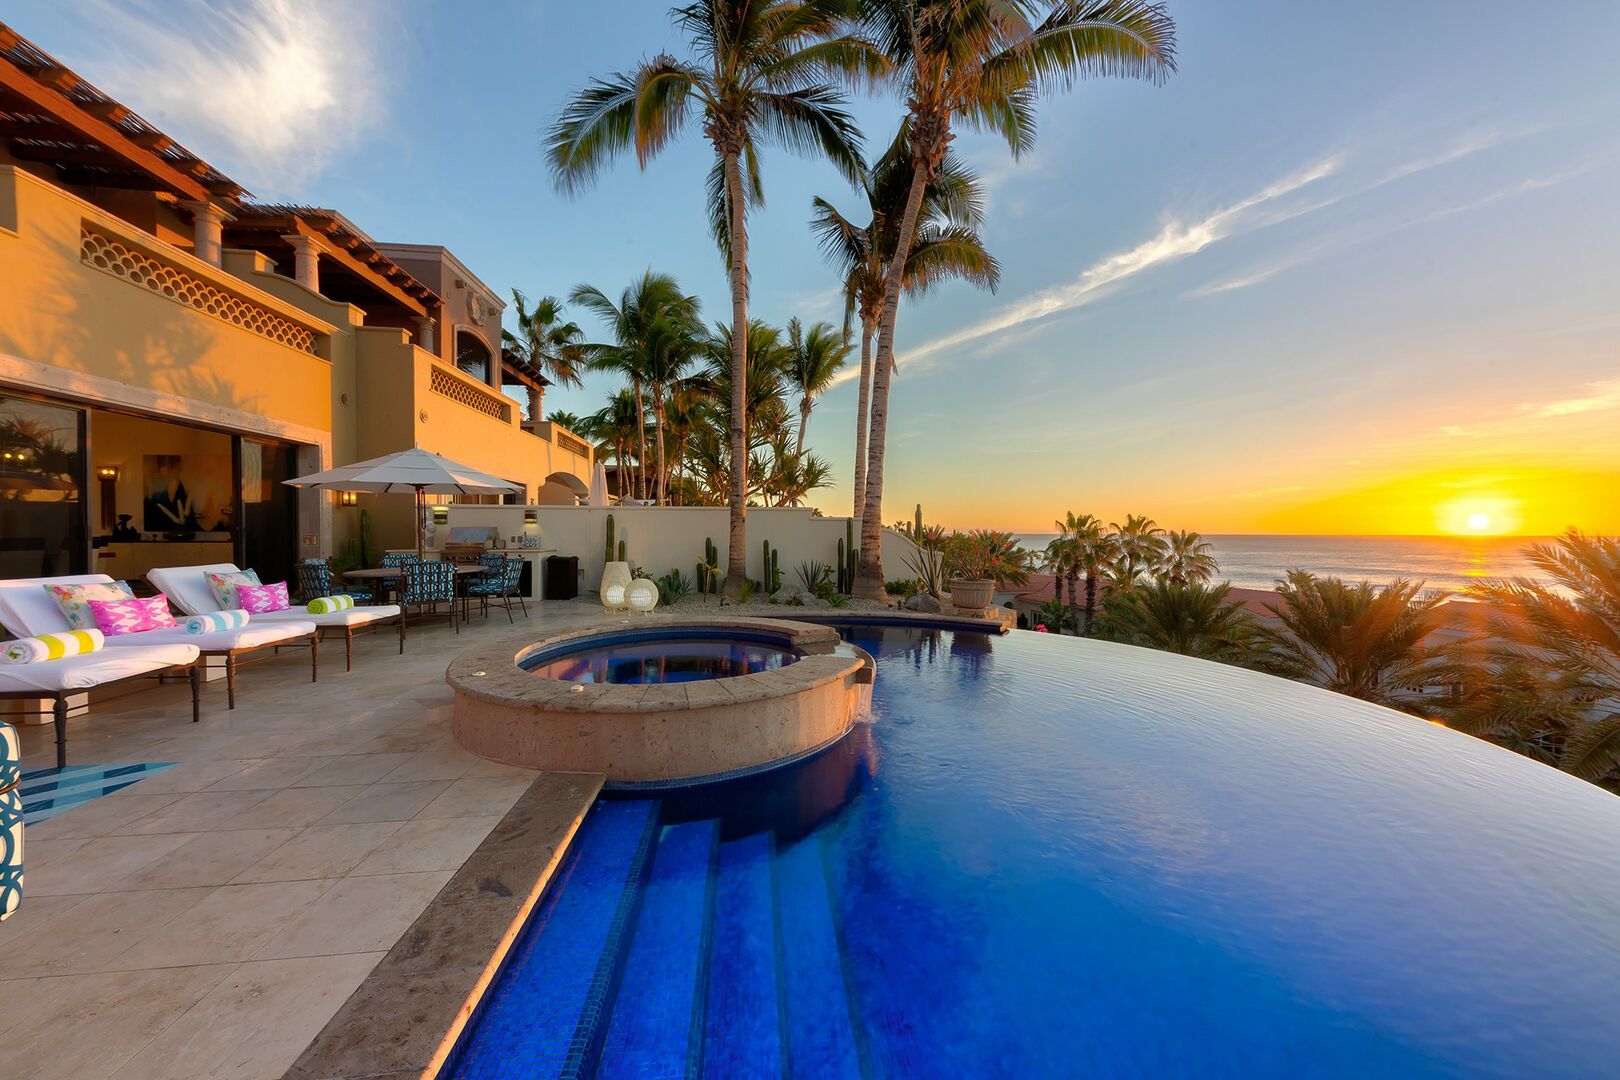 Side view of the pool and hot tub of this villa in Los Cabos.